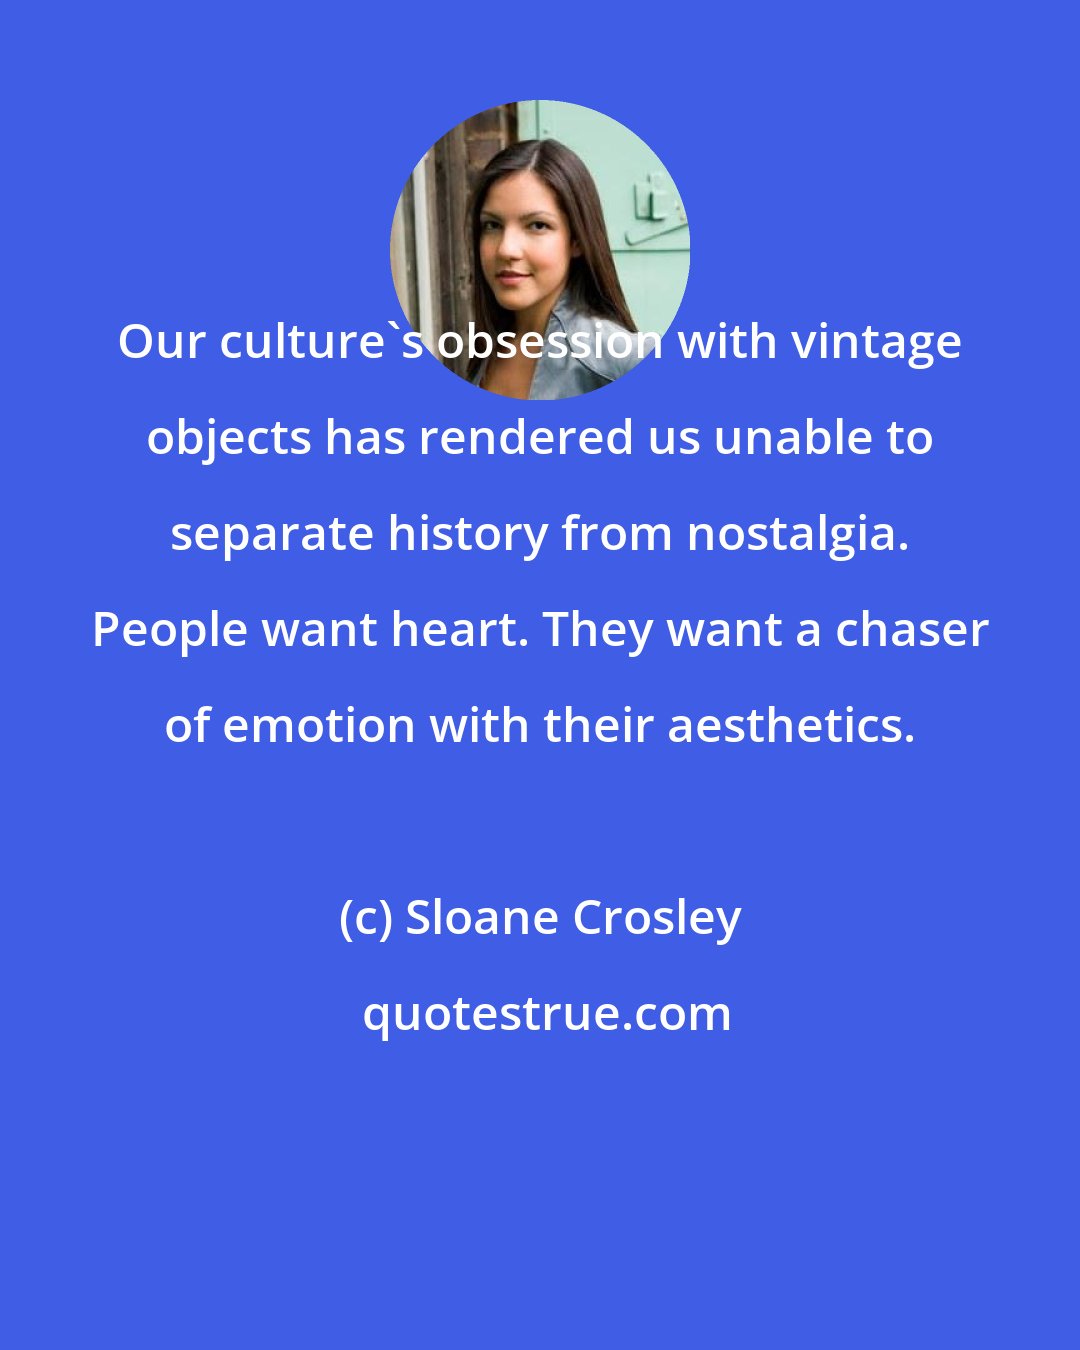 Sloane Crosley: Our culture's obsession with vintage objects has rendered us unable to separate history from nostalgia. People want heart. They want a chaser of emotion with their aesthetics.